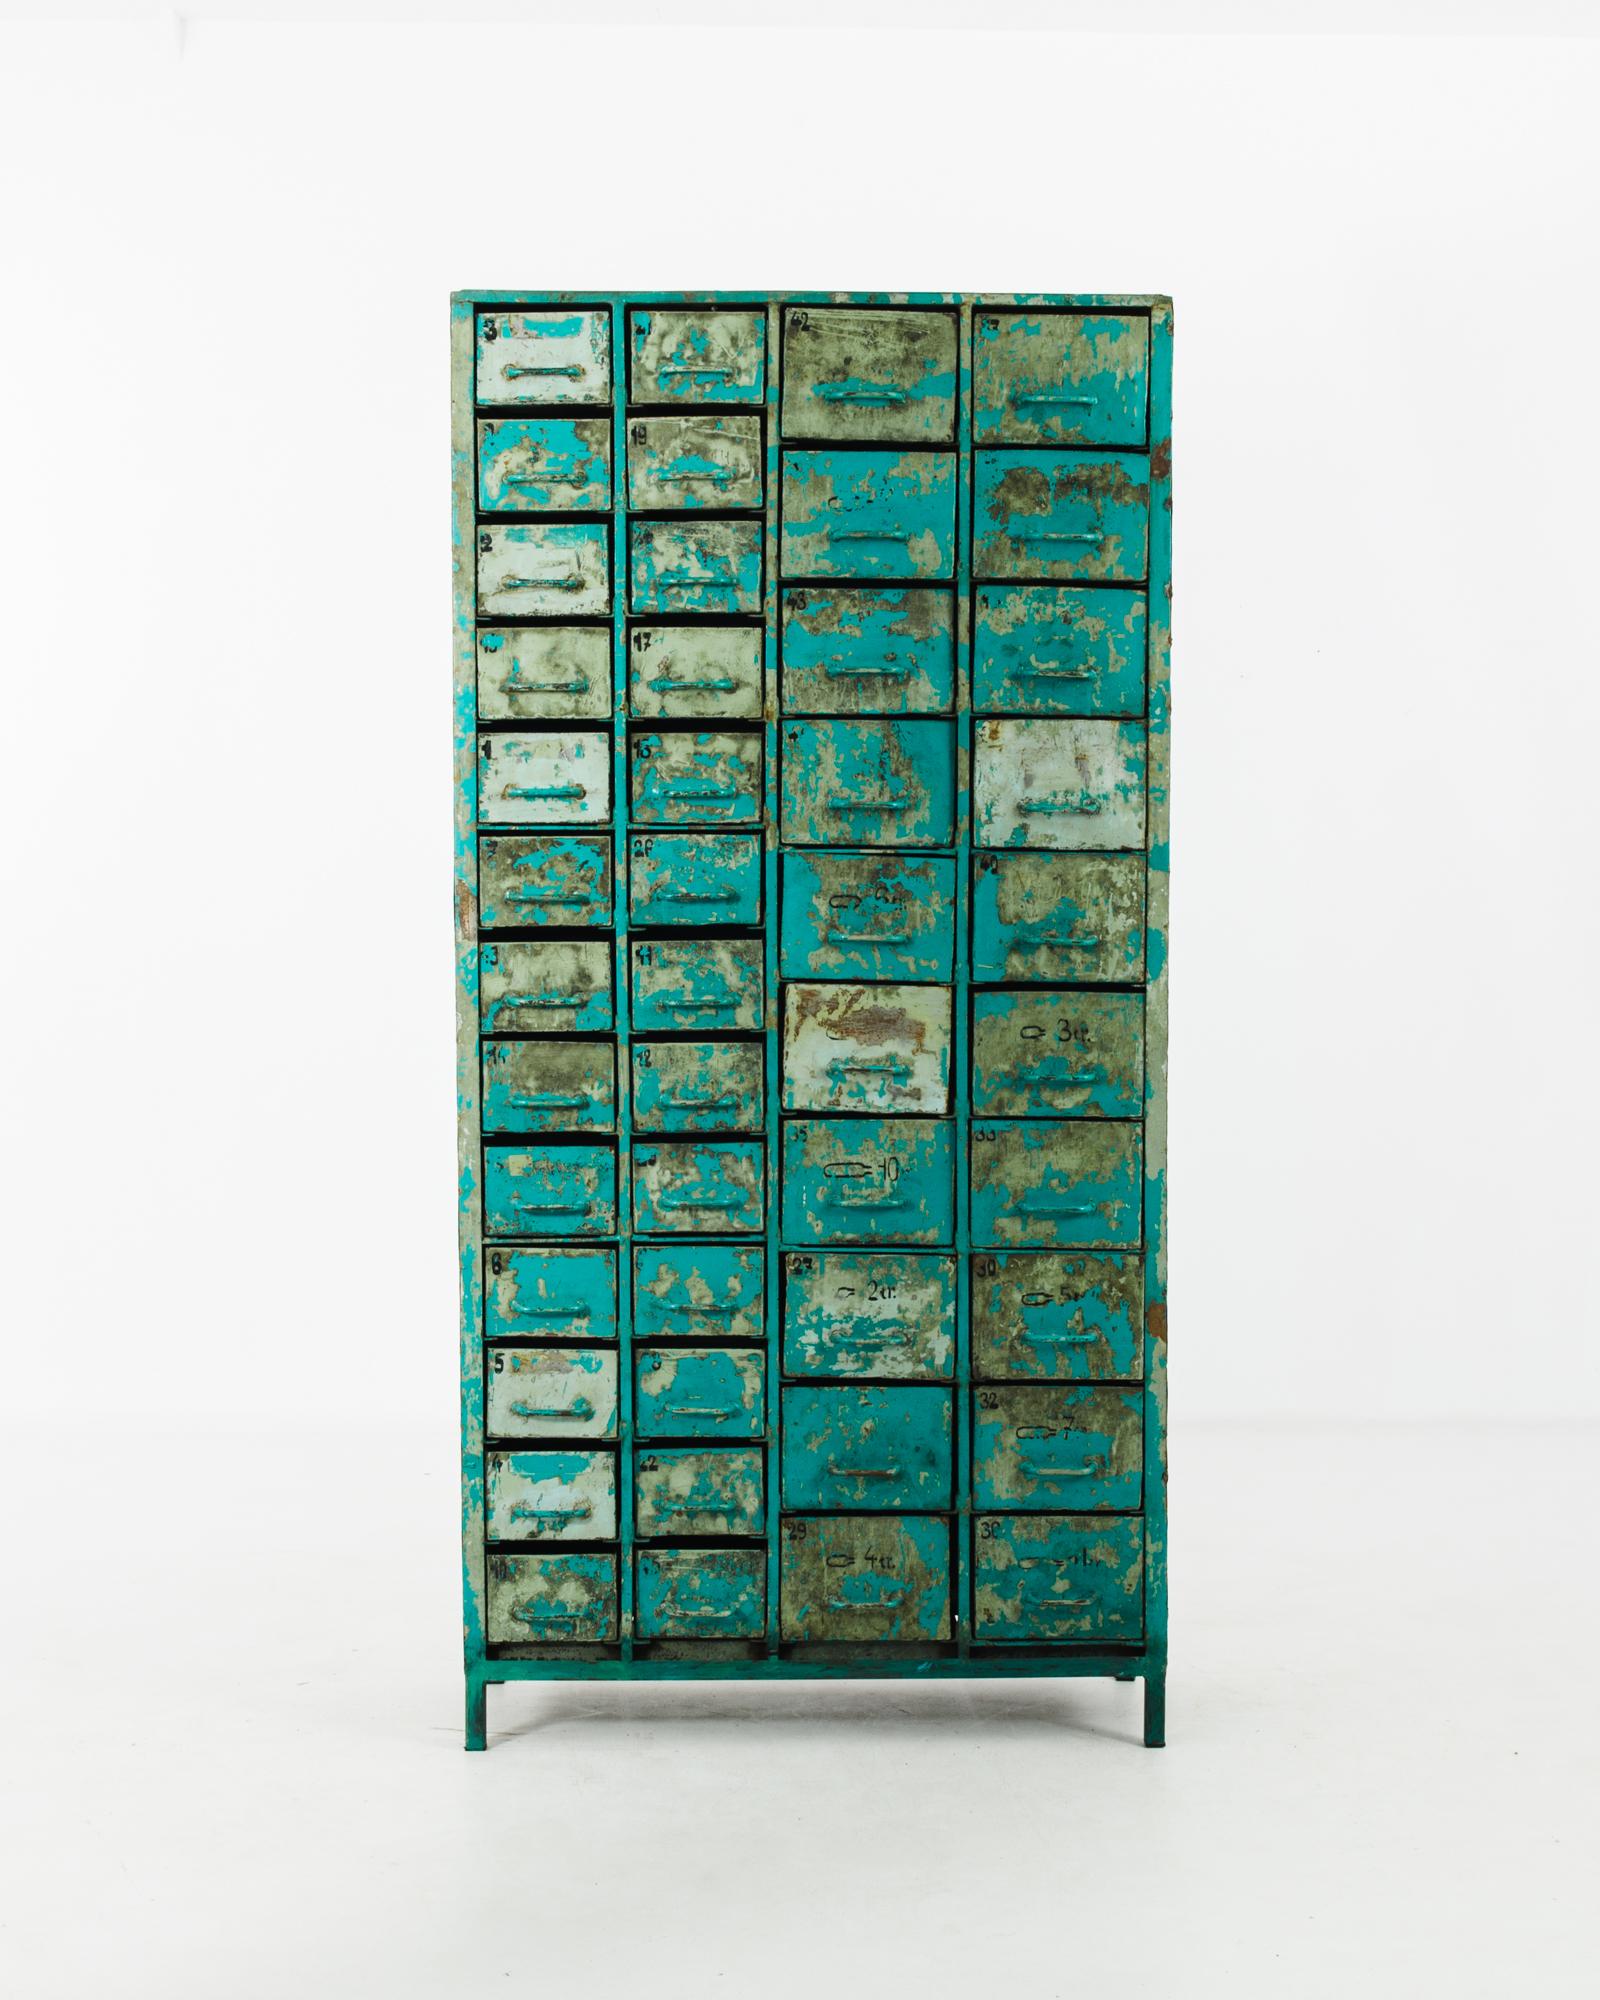 The striking patina of this filing cabinet from 1950s France lends an idiosyncratic edge to the industrial form. The original teal blue paint has been scraped and chipped away, revealing the gold and grey of the metal beneath. The distressed finish